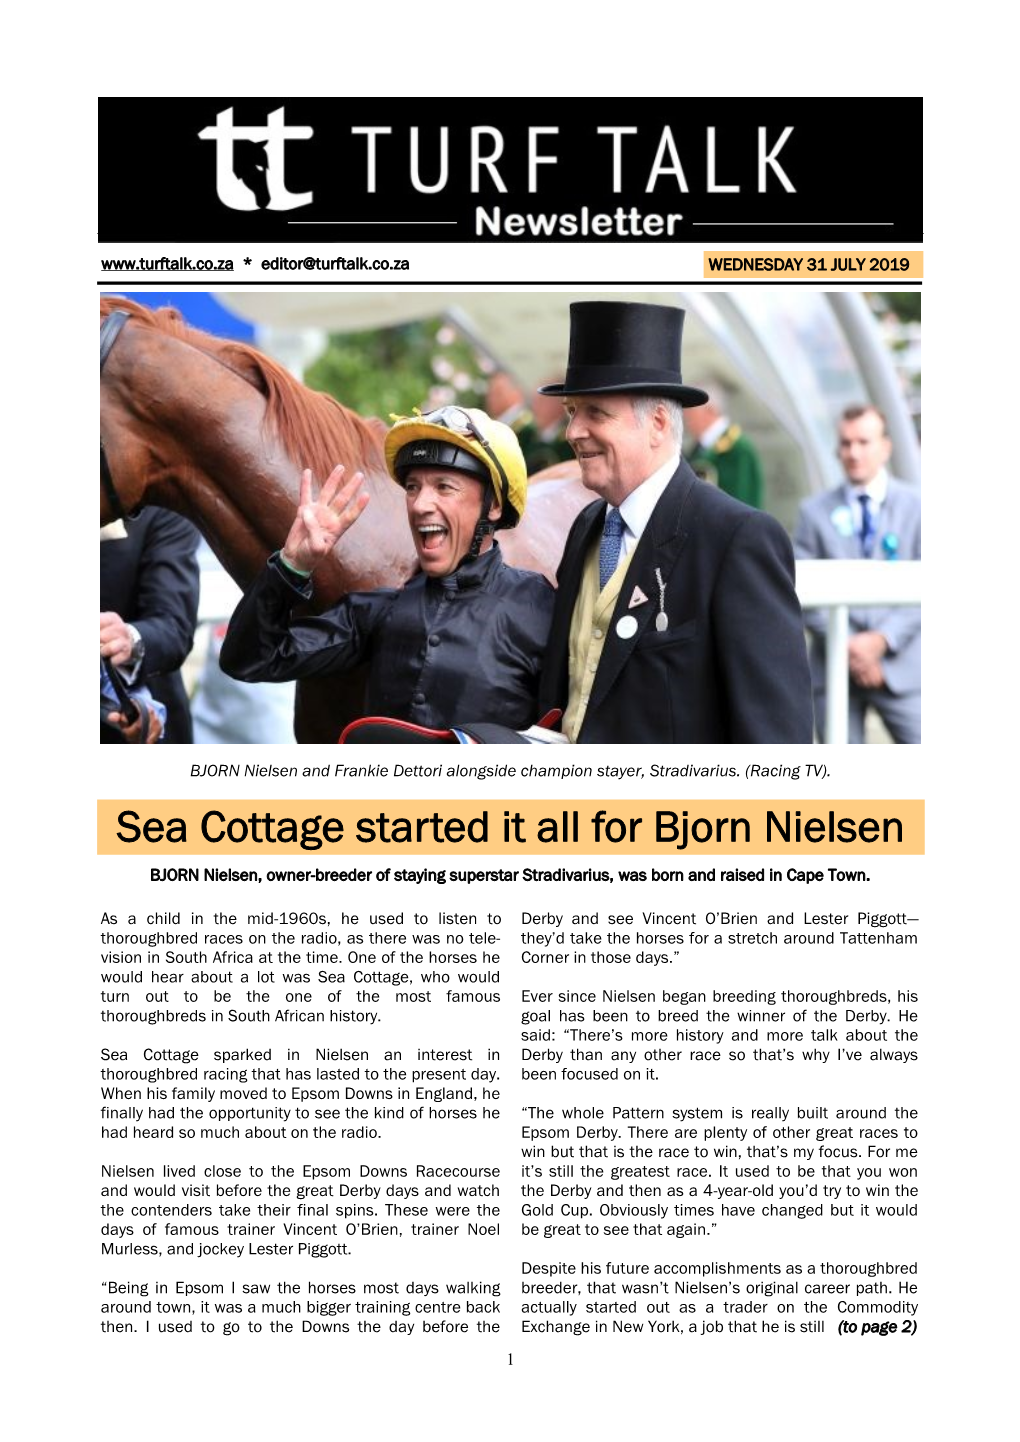 Sea Cottage Started It All for Bjorn Nielsen BJORN Nielsen, Owner-Breeder of Staying Superstar Stradivarius, Was Born and Raised in Cape Town